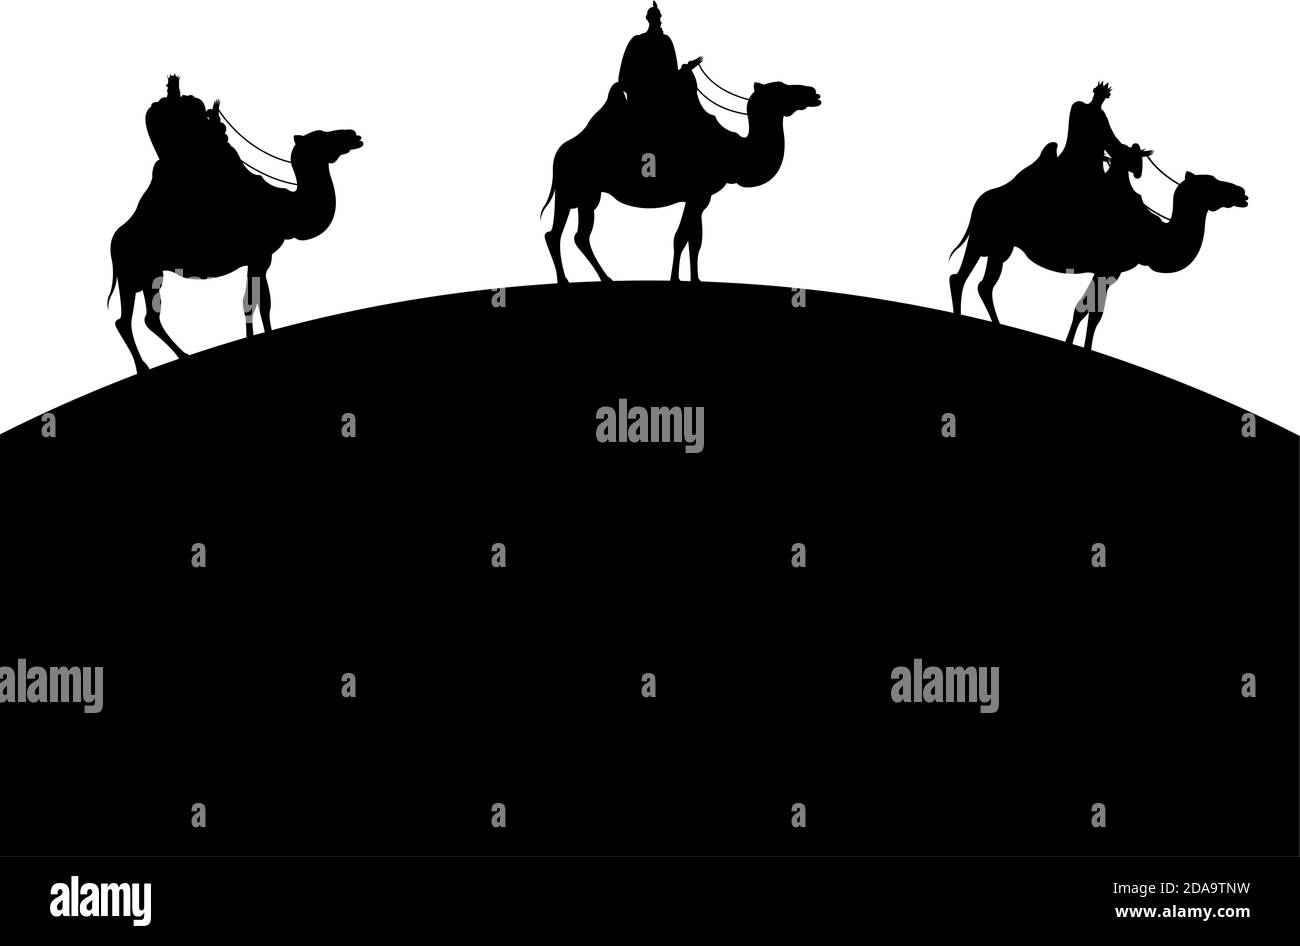 wise men group in camels mangers characters silhouette character vector illustration design Stock Vector